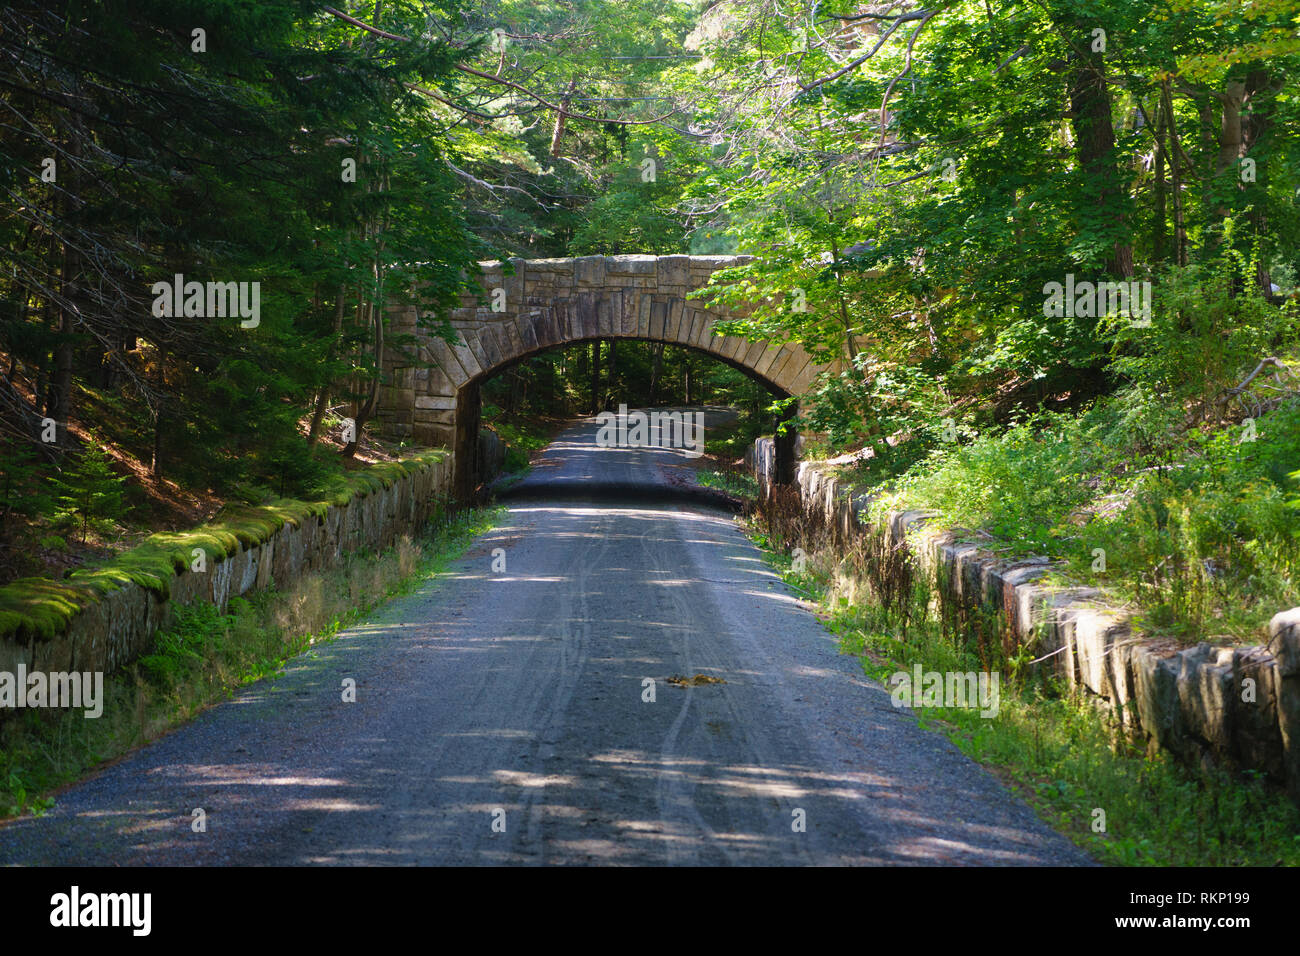 Stone bridge spanning a carriage road in Acadia National Park, Maine, USA. The carriage roads are only opened to horses and bicycles. Stock Photo